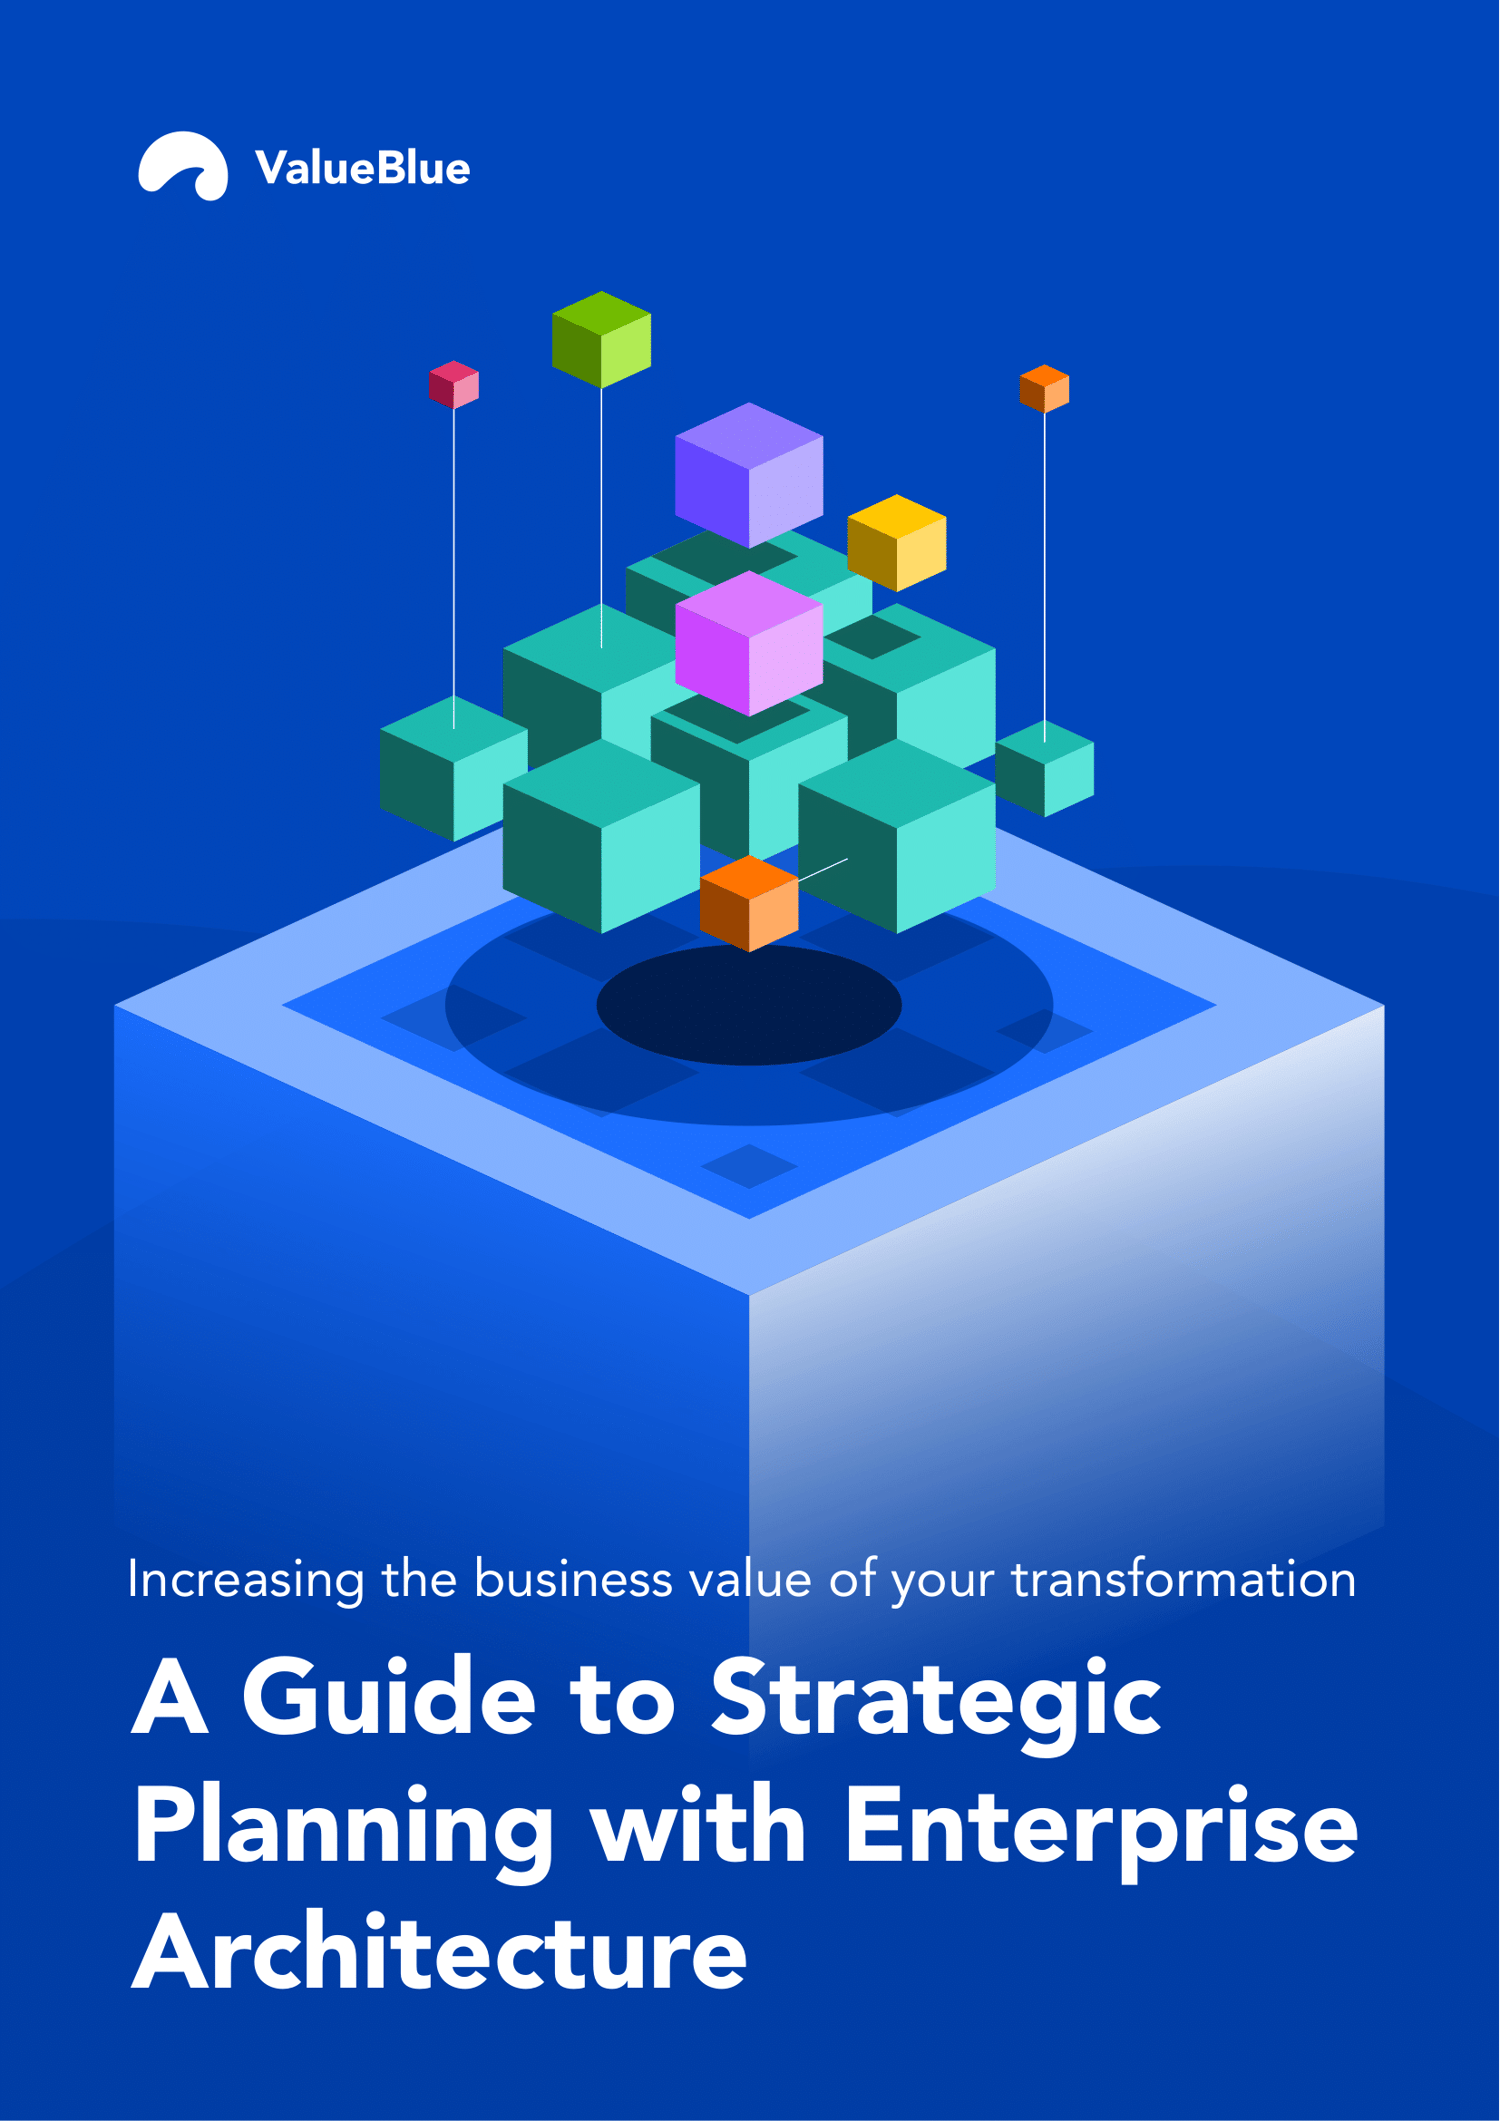 A Guide to Strategic Planning with Enterprise Architecture